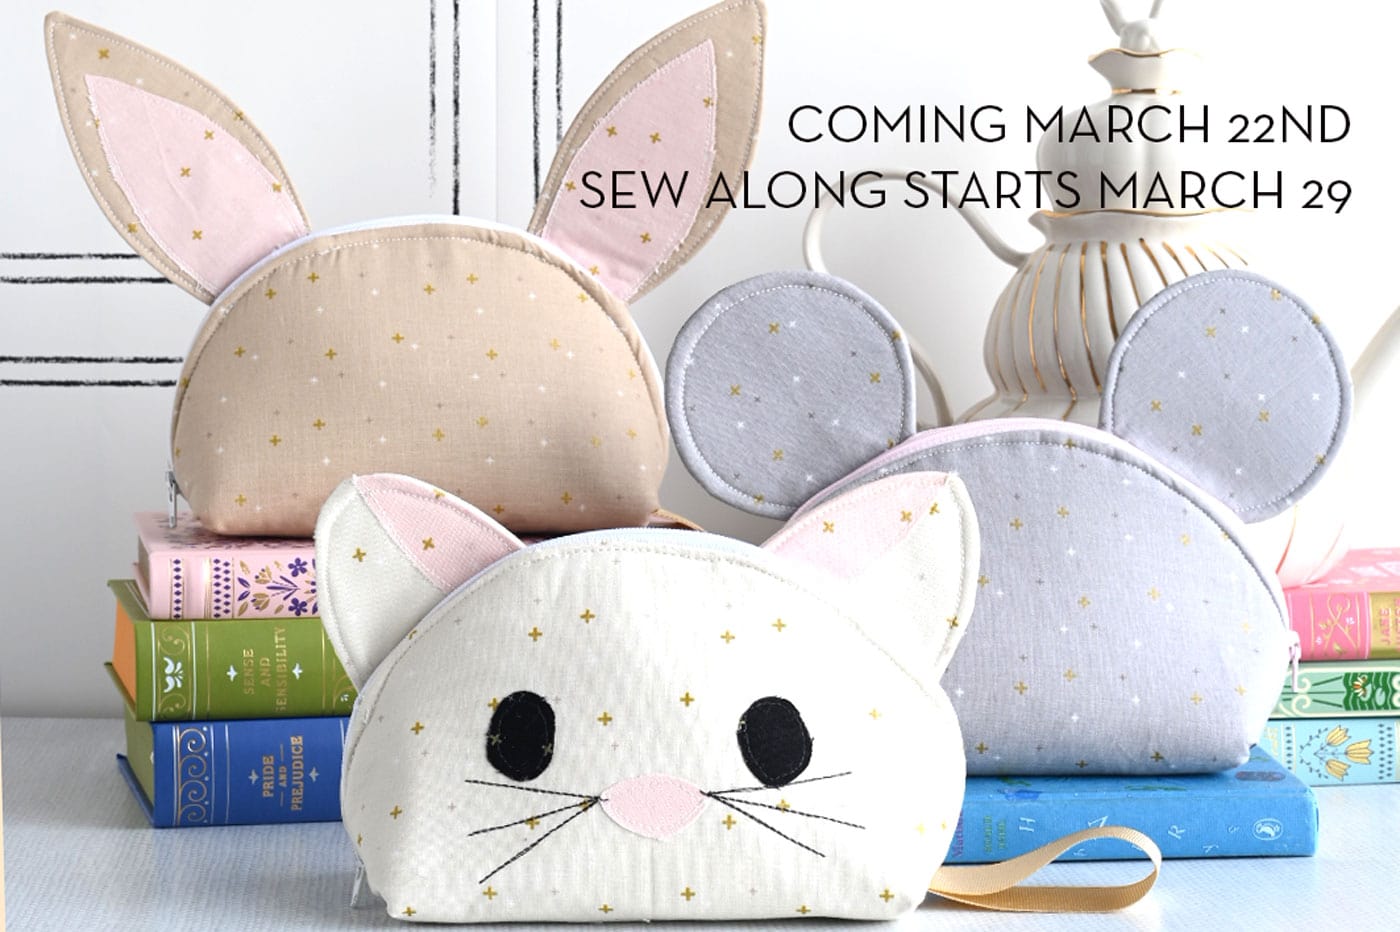 bunny, cat and mouse neutral color zip pouches on table with books